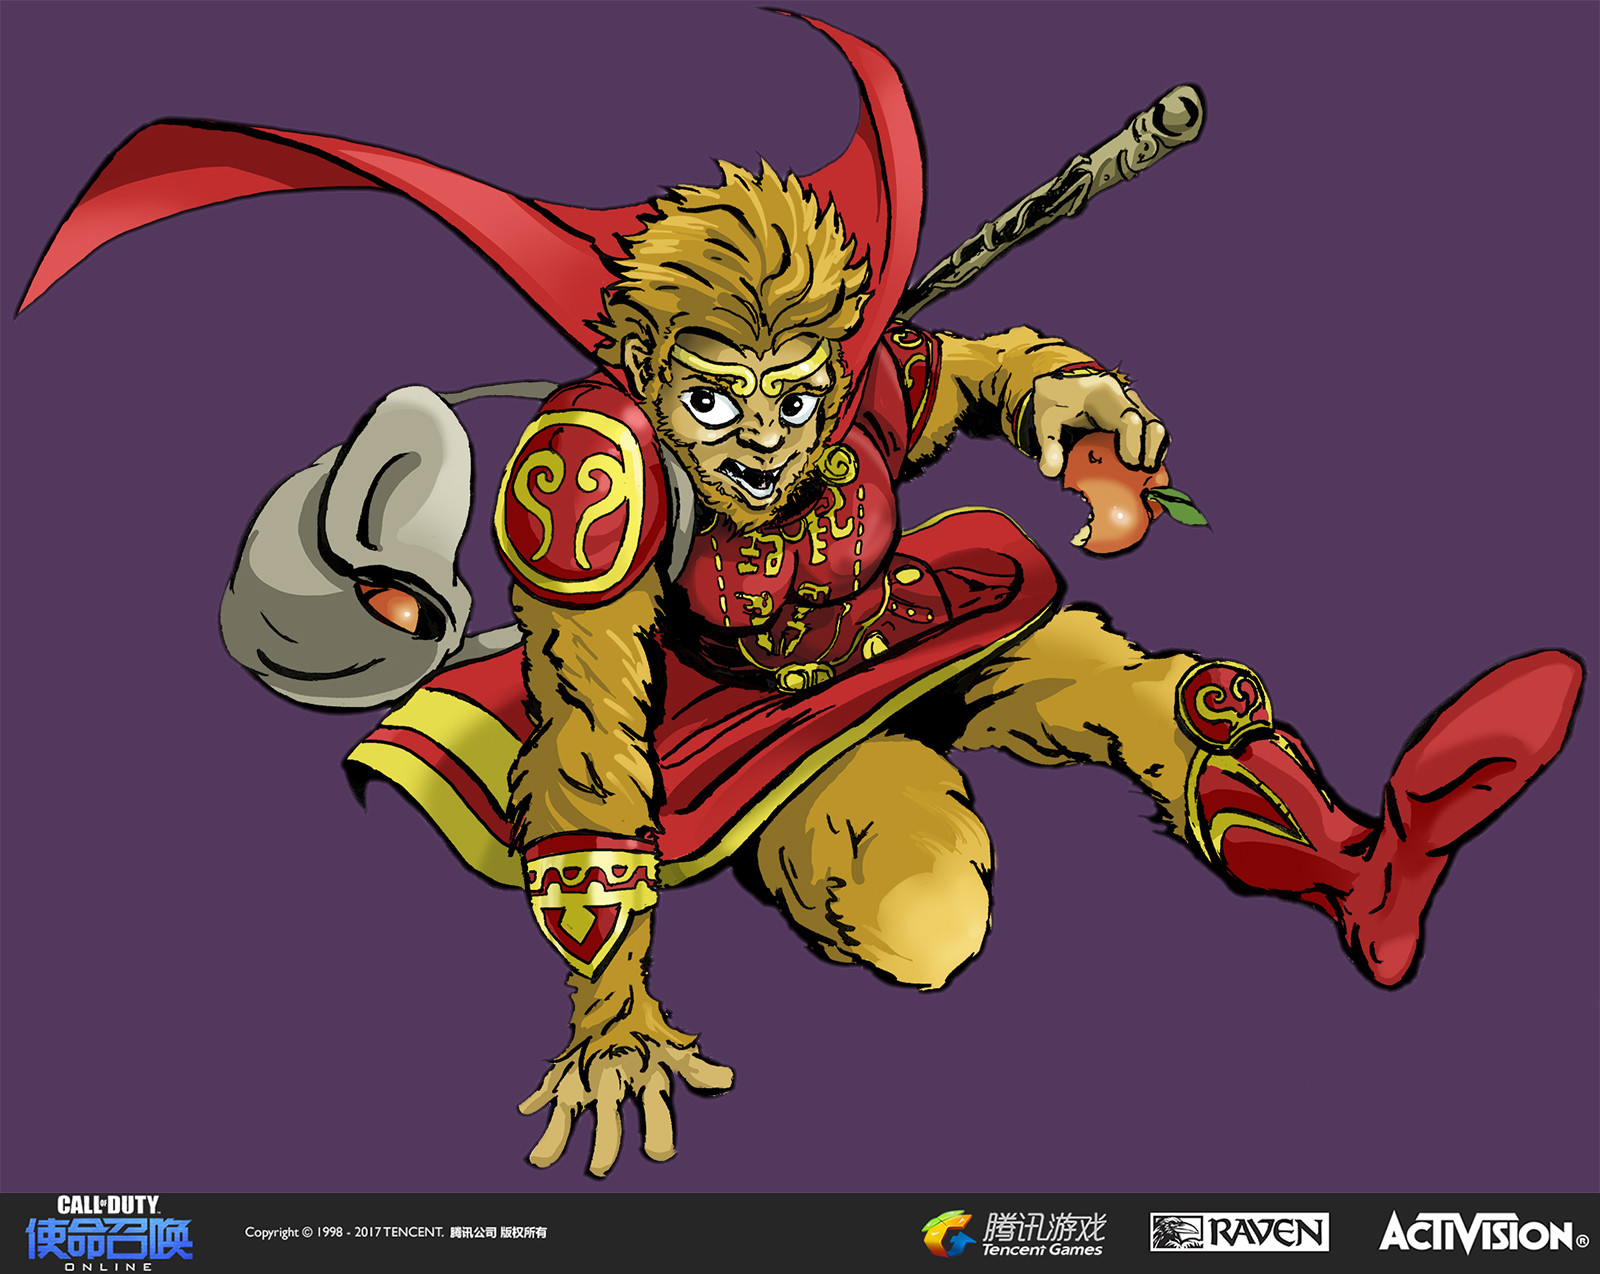 I created this illustration to appear in the remake of Modern Warfare 2's DLC Carnival map. The theme for this year was the Monkey King. I drew the Monkey King in pen and ink and colored with vector in Adobe Illustrator.